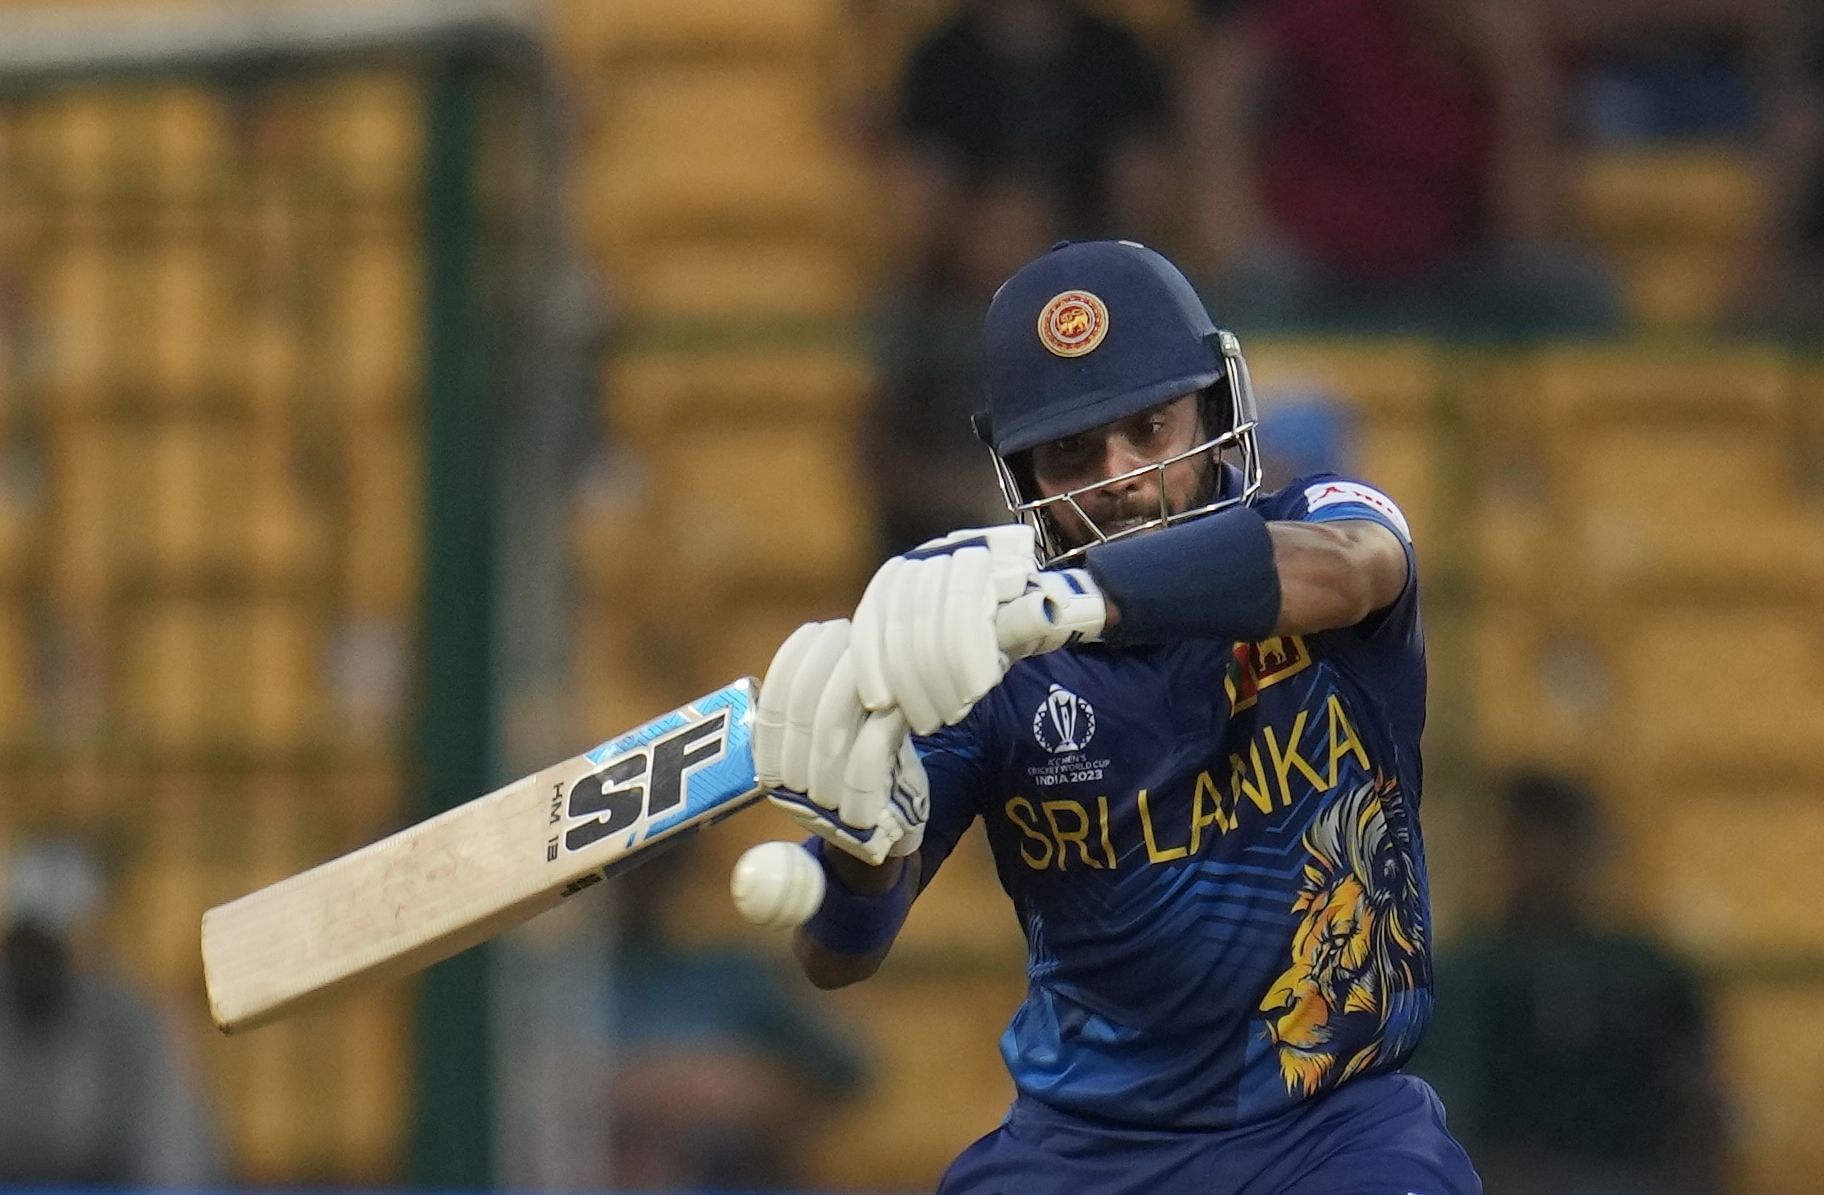 Bangladesh vs Sri Lanka, 2023 World Cup: Probable XIs, pitch report, weather forecast and live streaming details